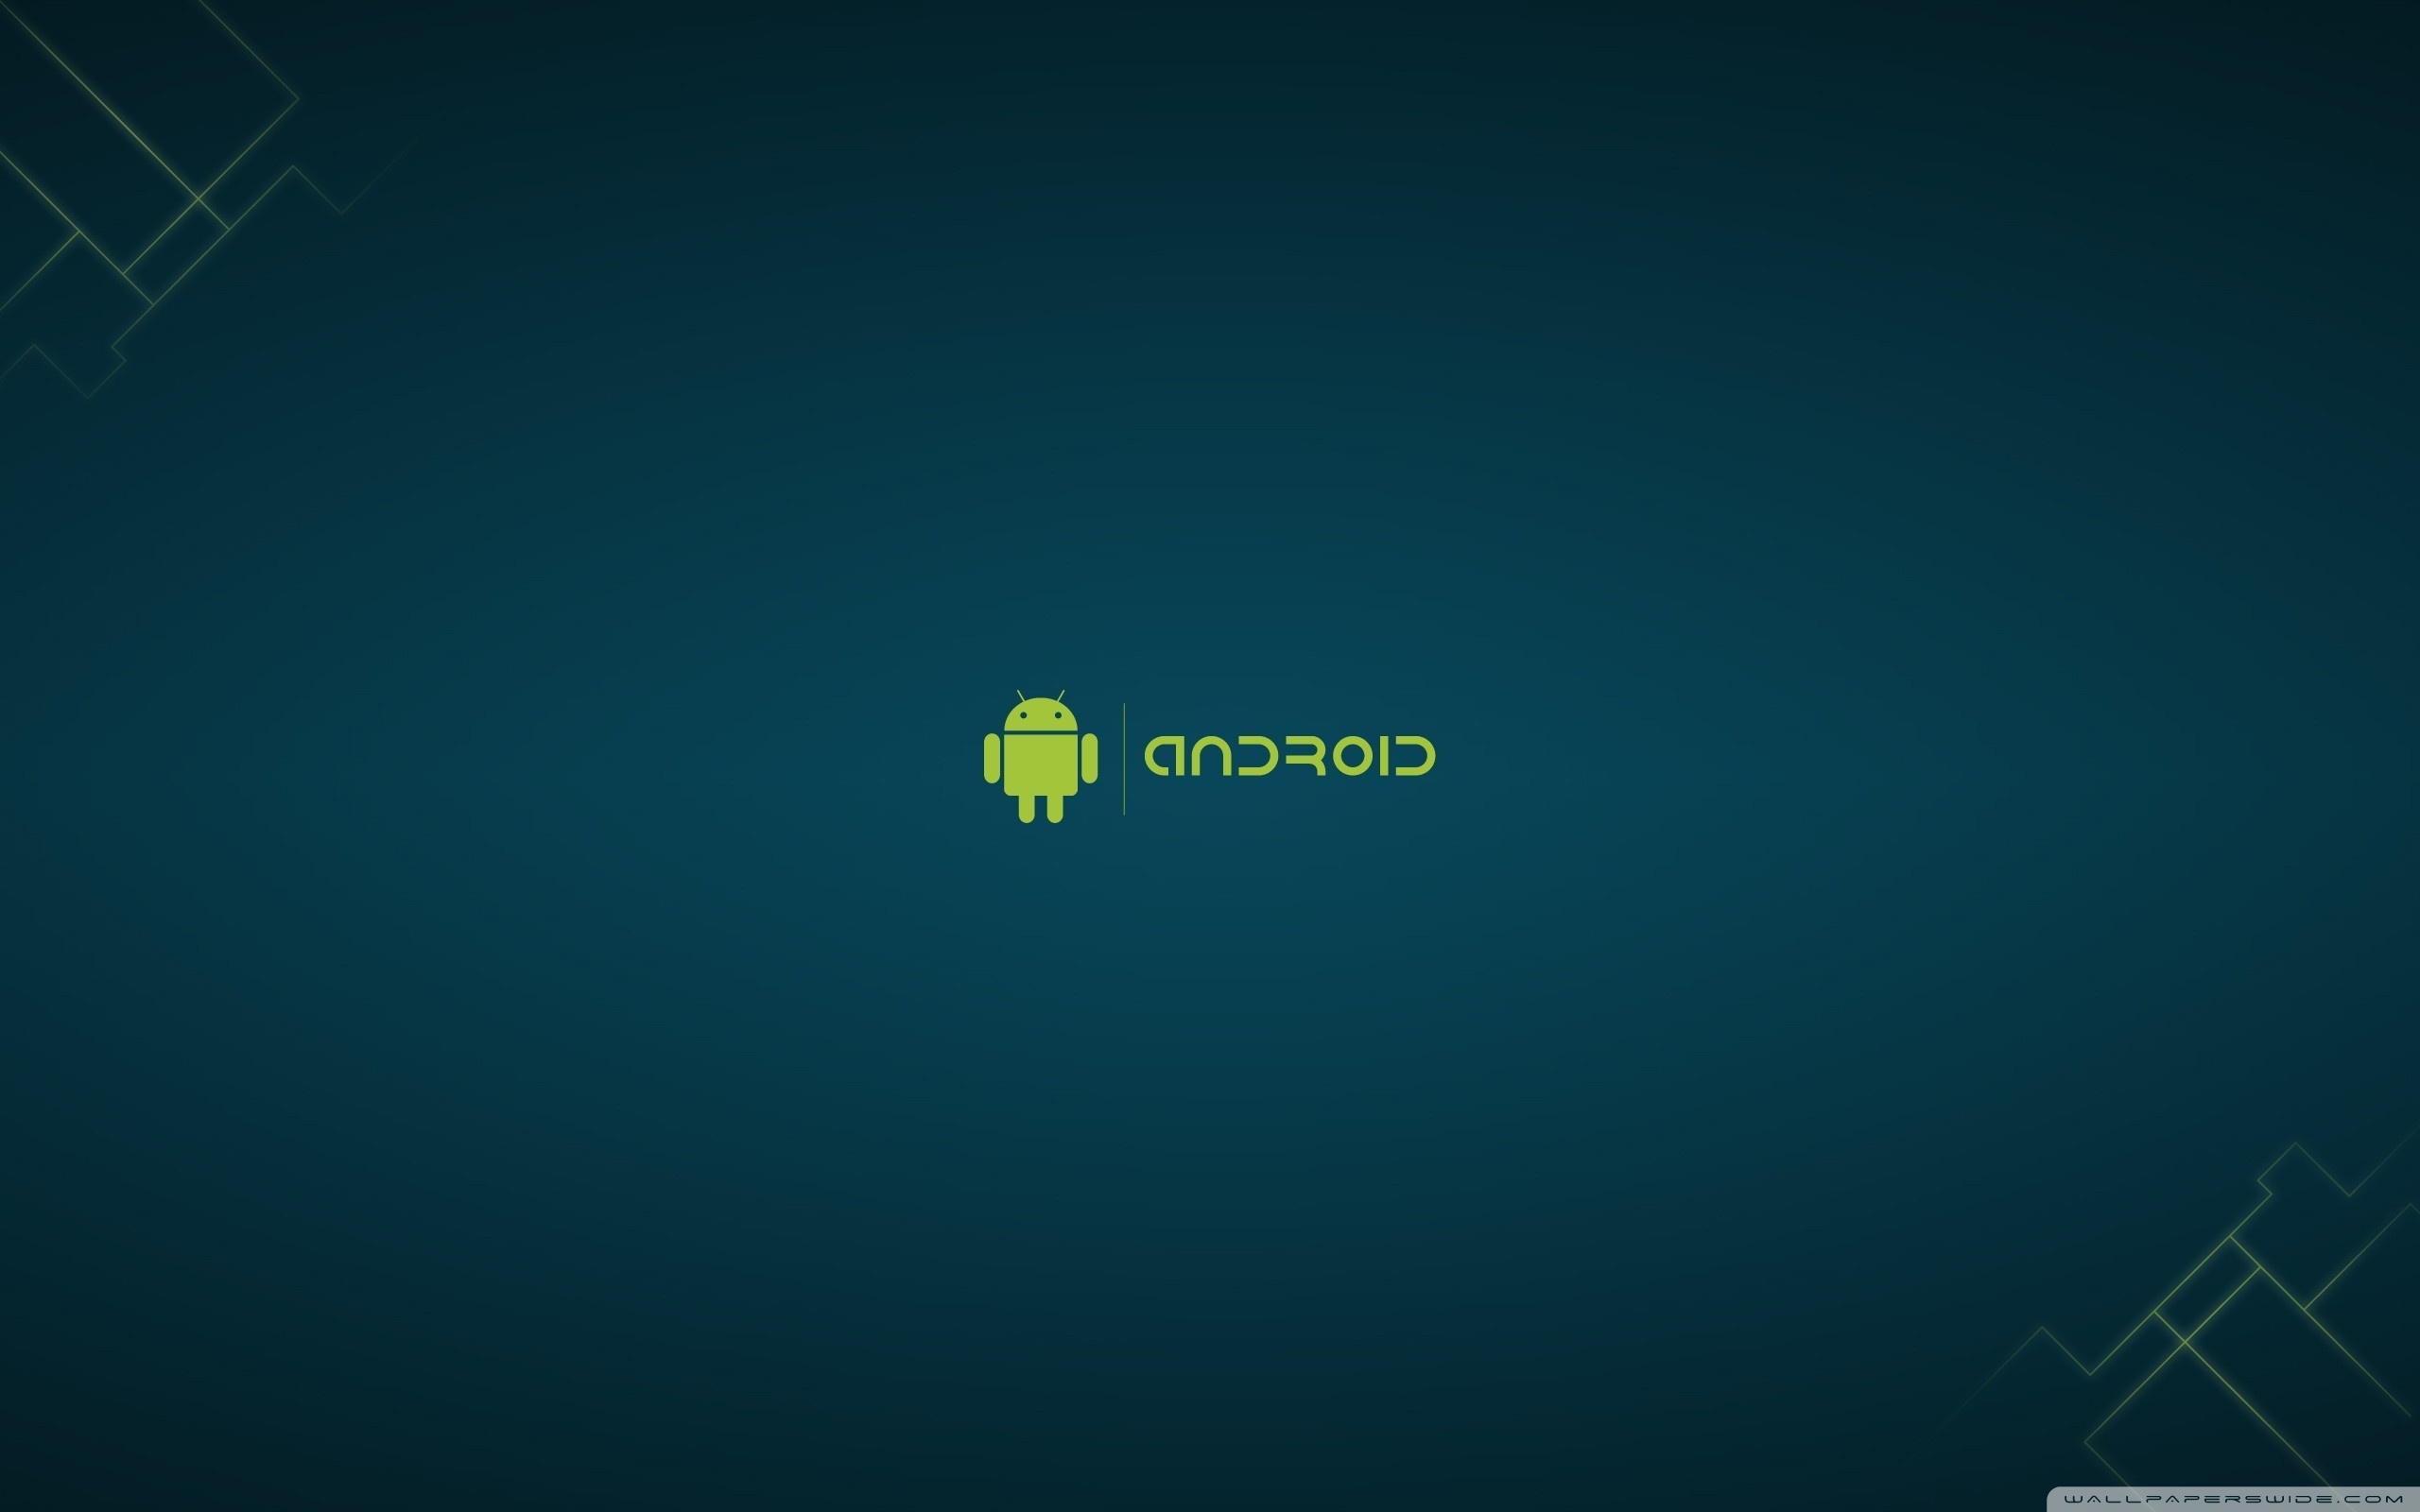 Android Background wallpaper | 2560x1600 | #83228